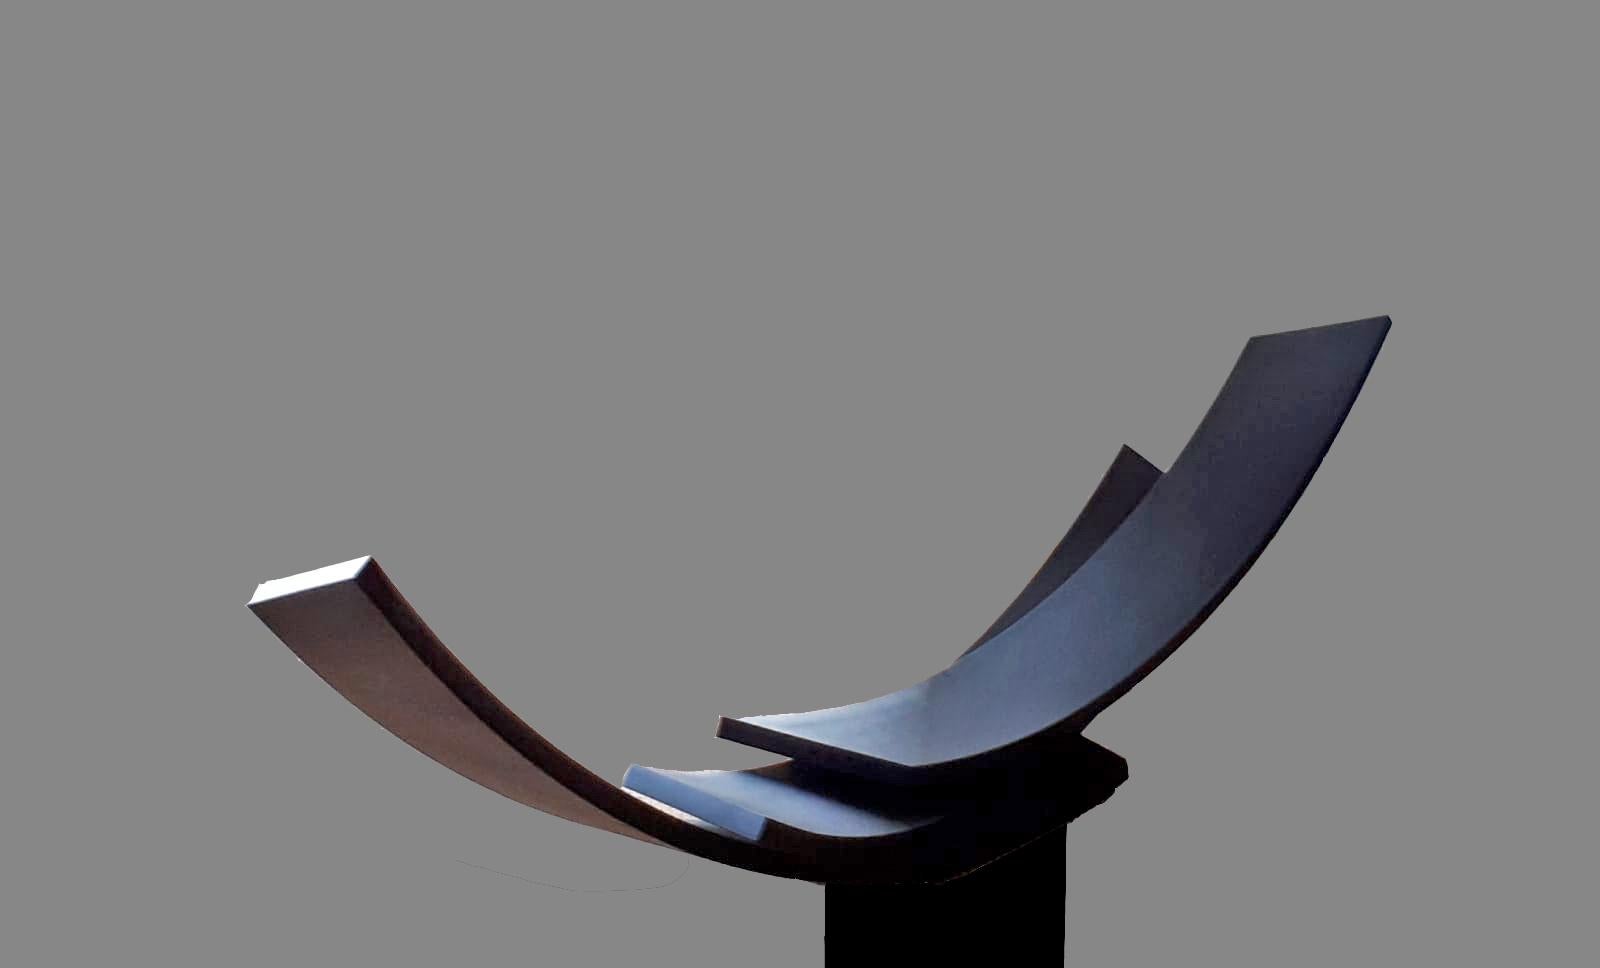 A large contemporary black steel sculpture. Beautiful on the floor or a pedestal. 
A contemporary statement piece full of elegance and movement.
_______________________________________________________________________

About the Gallery:
Folly and